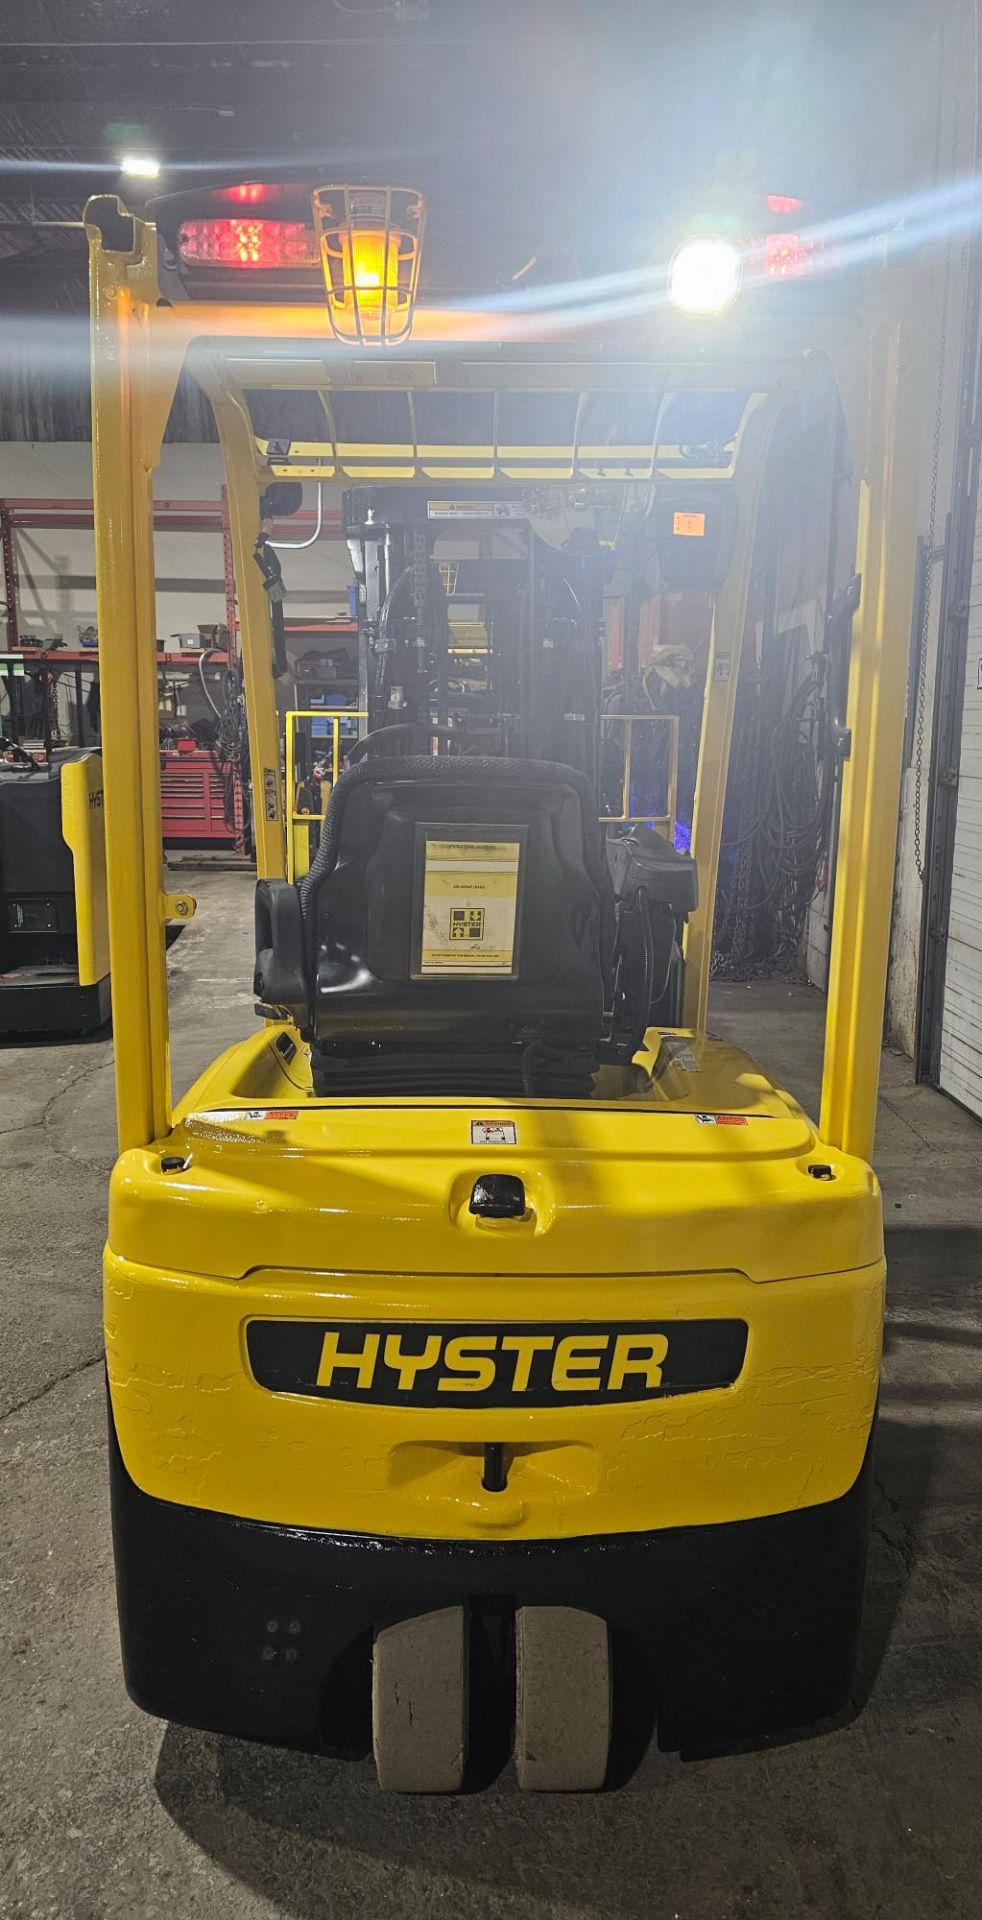 2017 Hyster 3,500lbs Capacity 3-Wheel Forklift Electric 36V with sideshift positioner & 3-STAGE MAST - Image 6 of 7